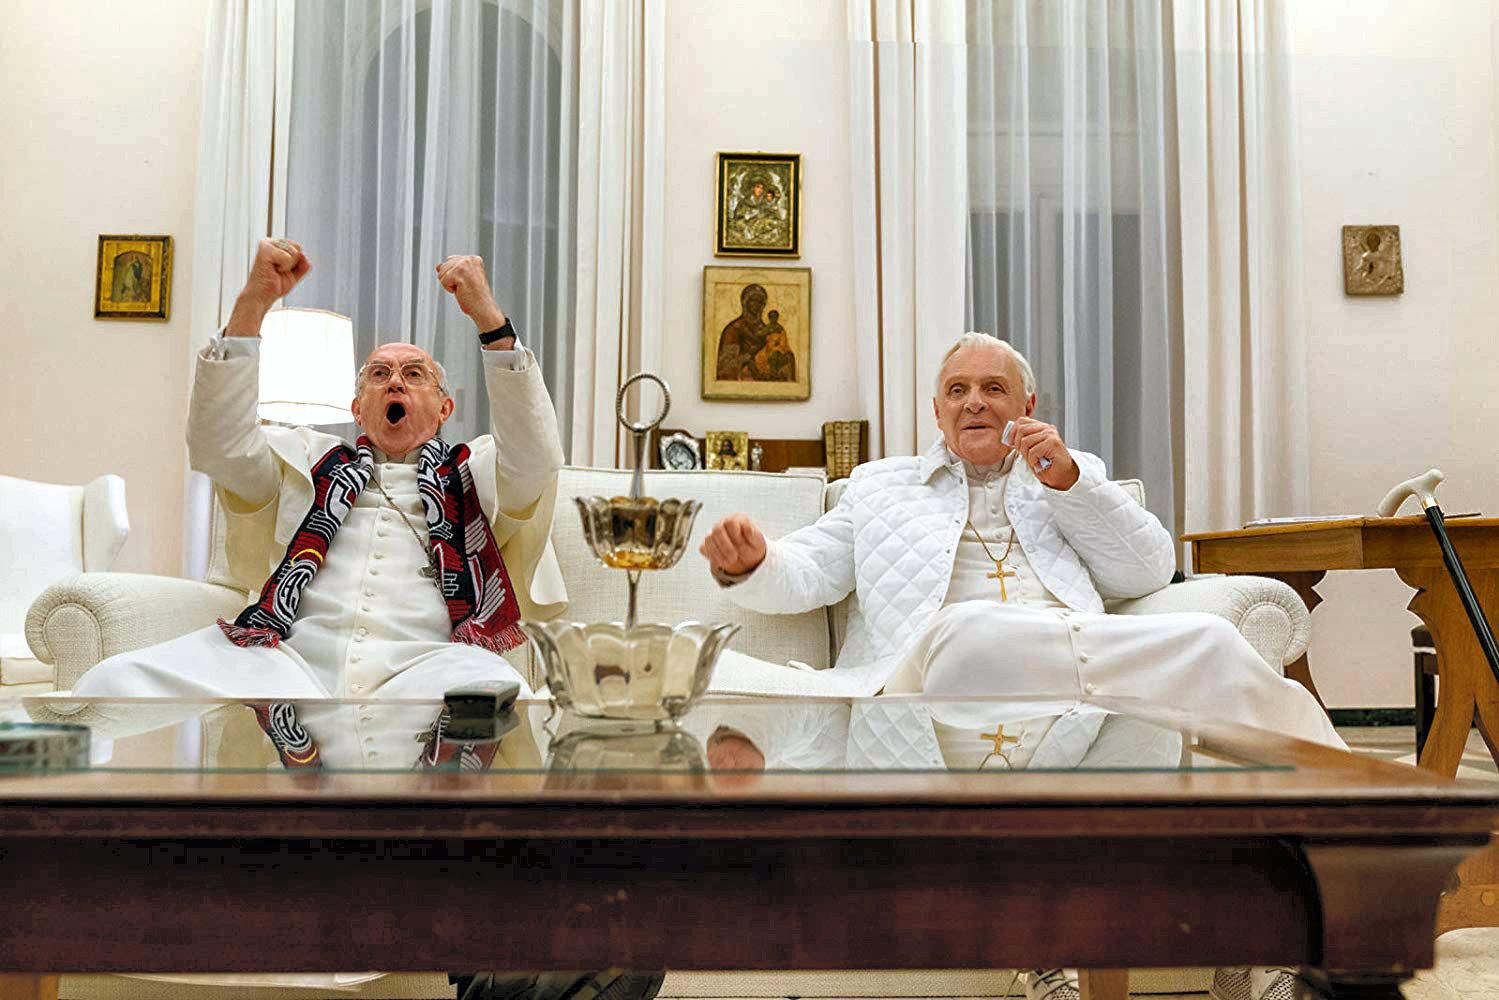 redde Stifte bekendtskab tapet Review: Anthony Hopkins and Jonathan Pryce shine in Netflix's 'The Two Popes '